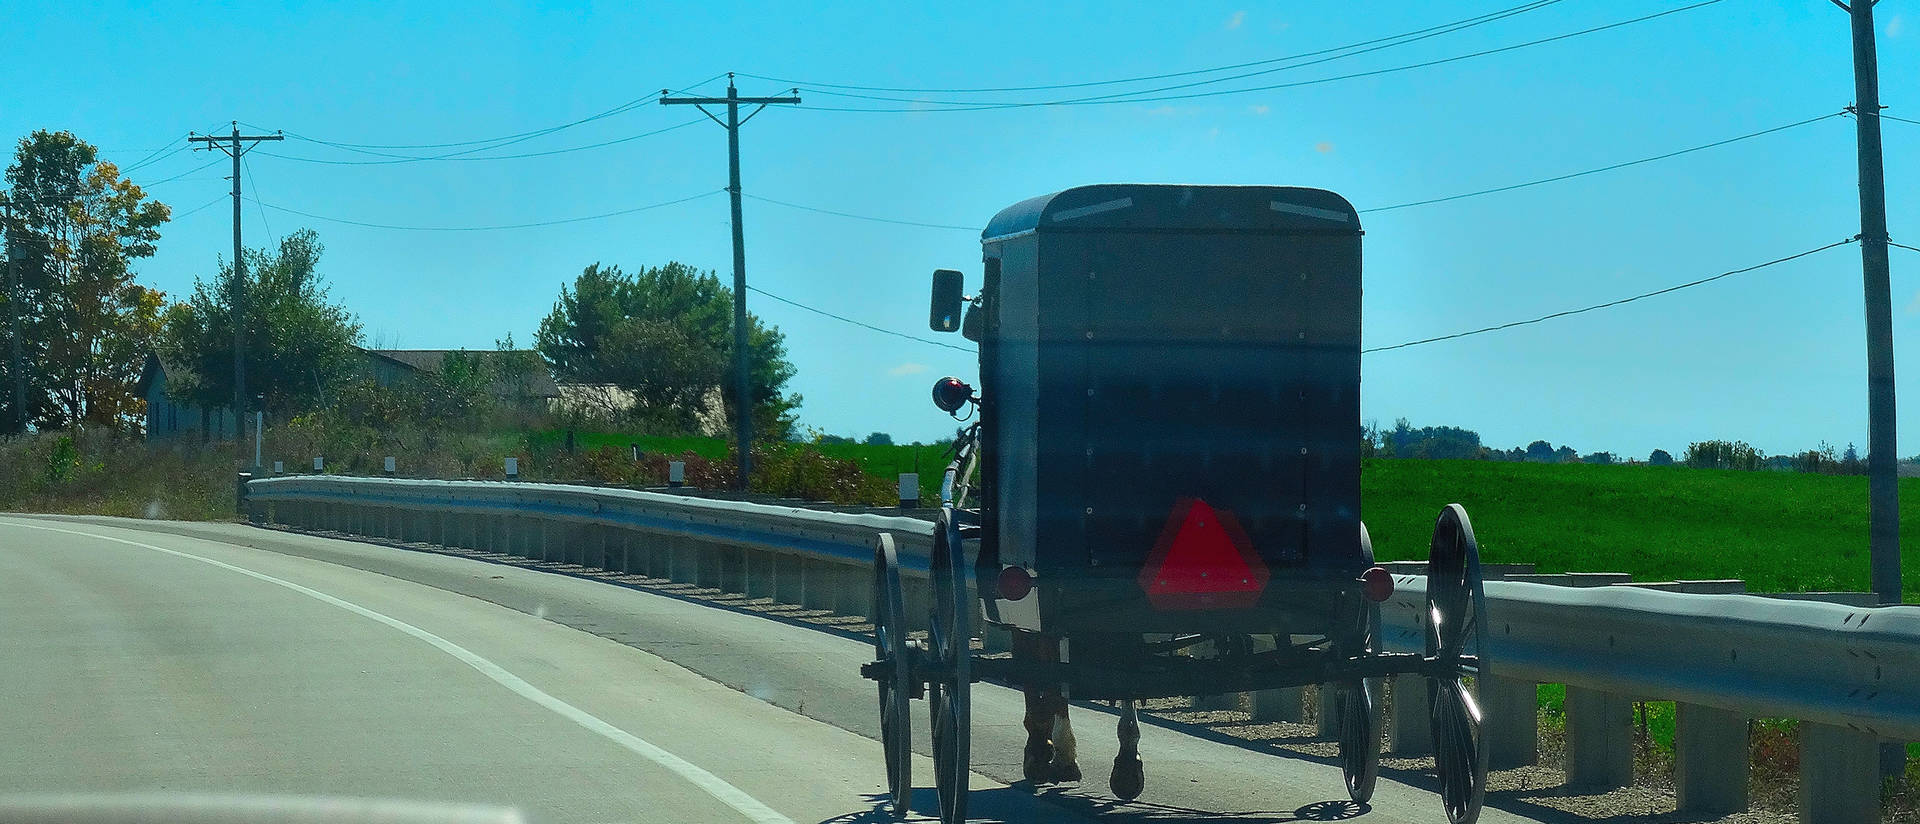 An Amish buggy travels on U.S. Highway 61. (Photo credit: Corey Coyle, Wikimedia Commons)